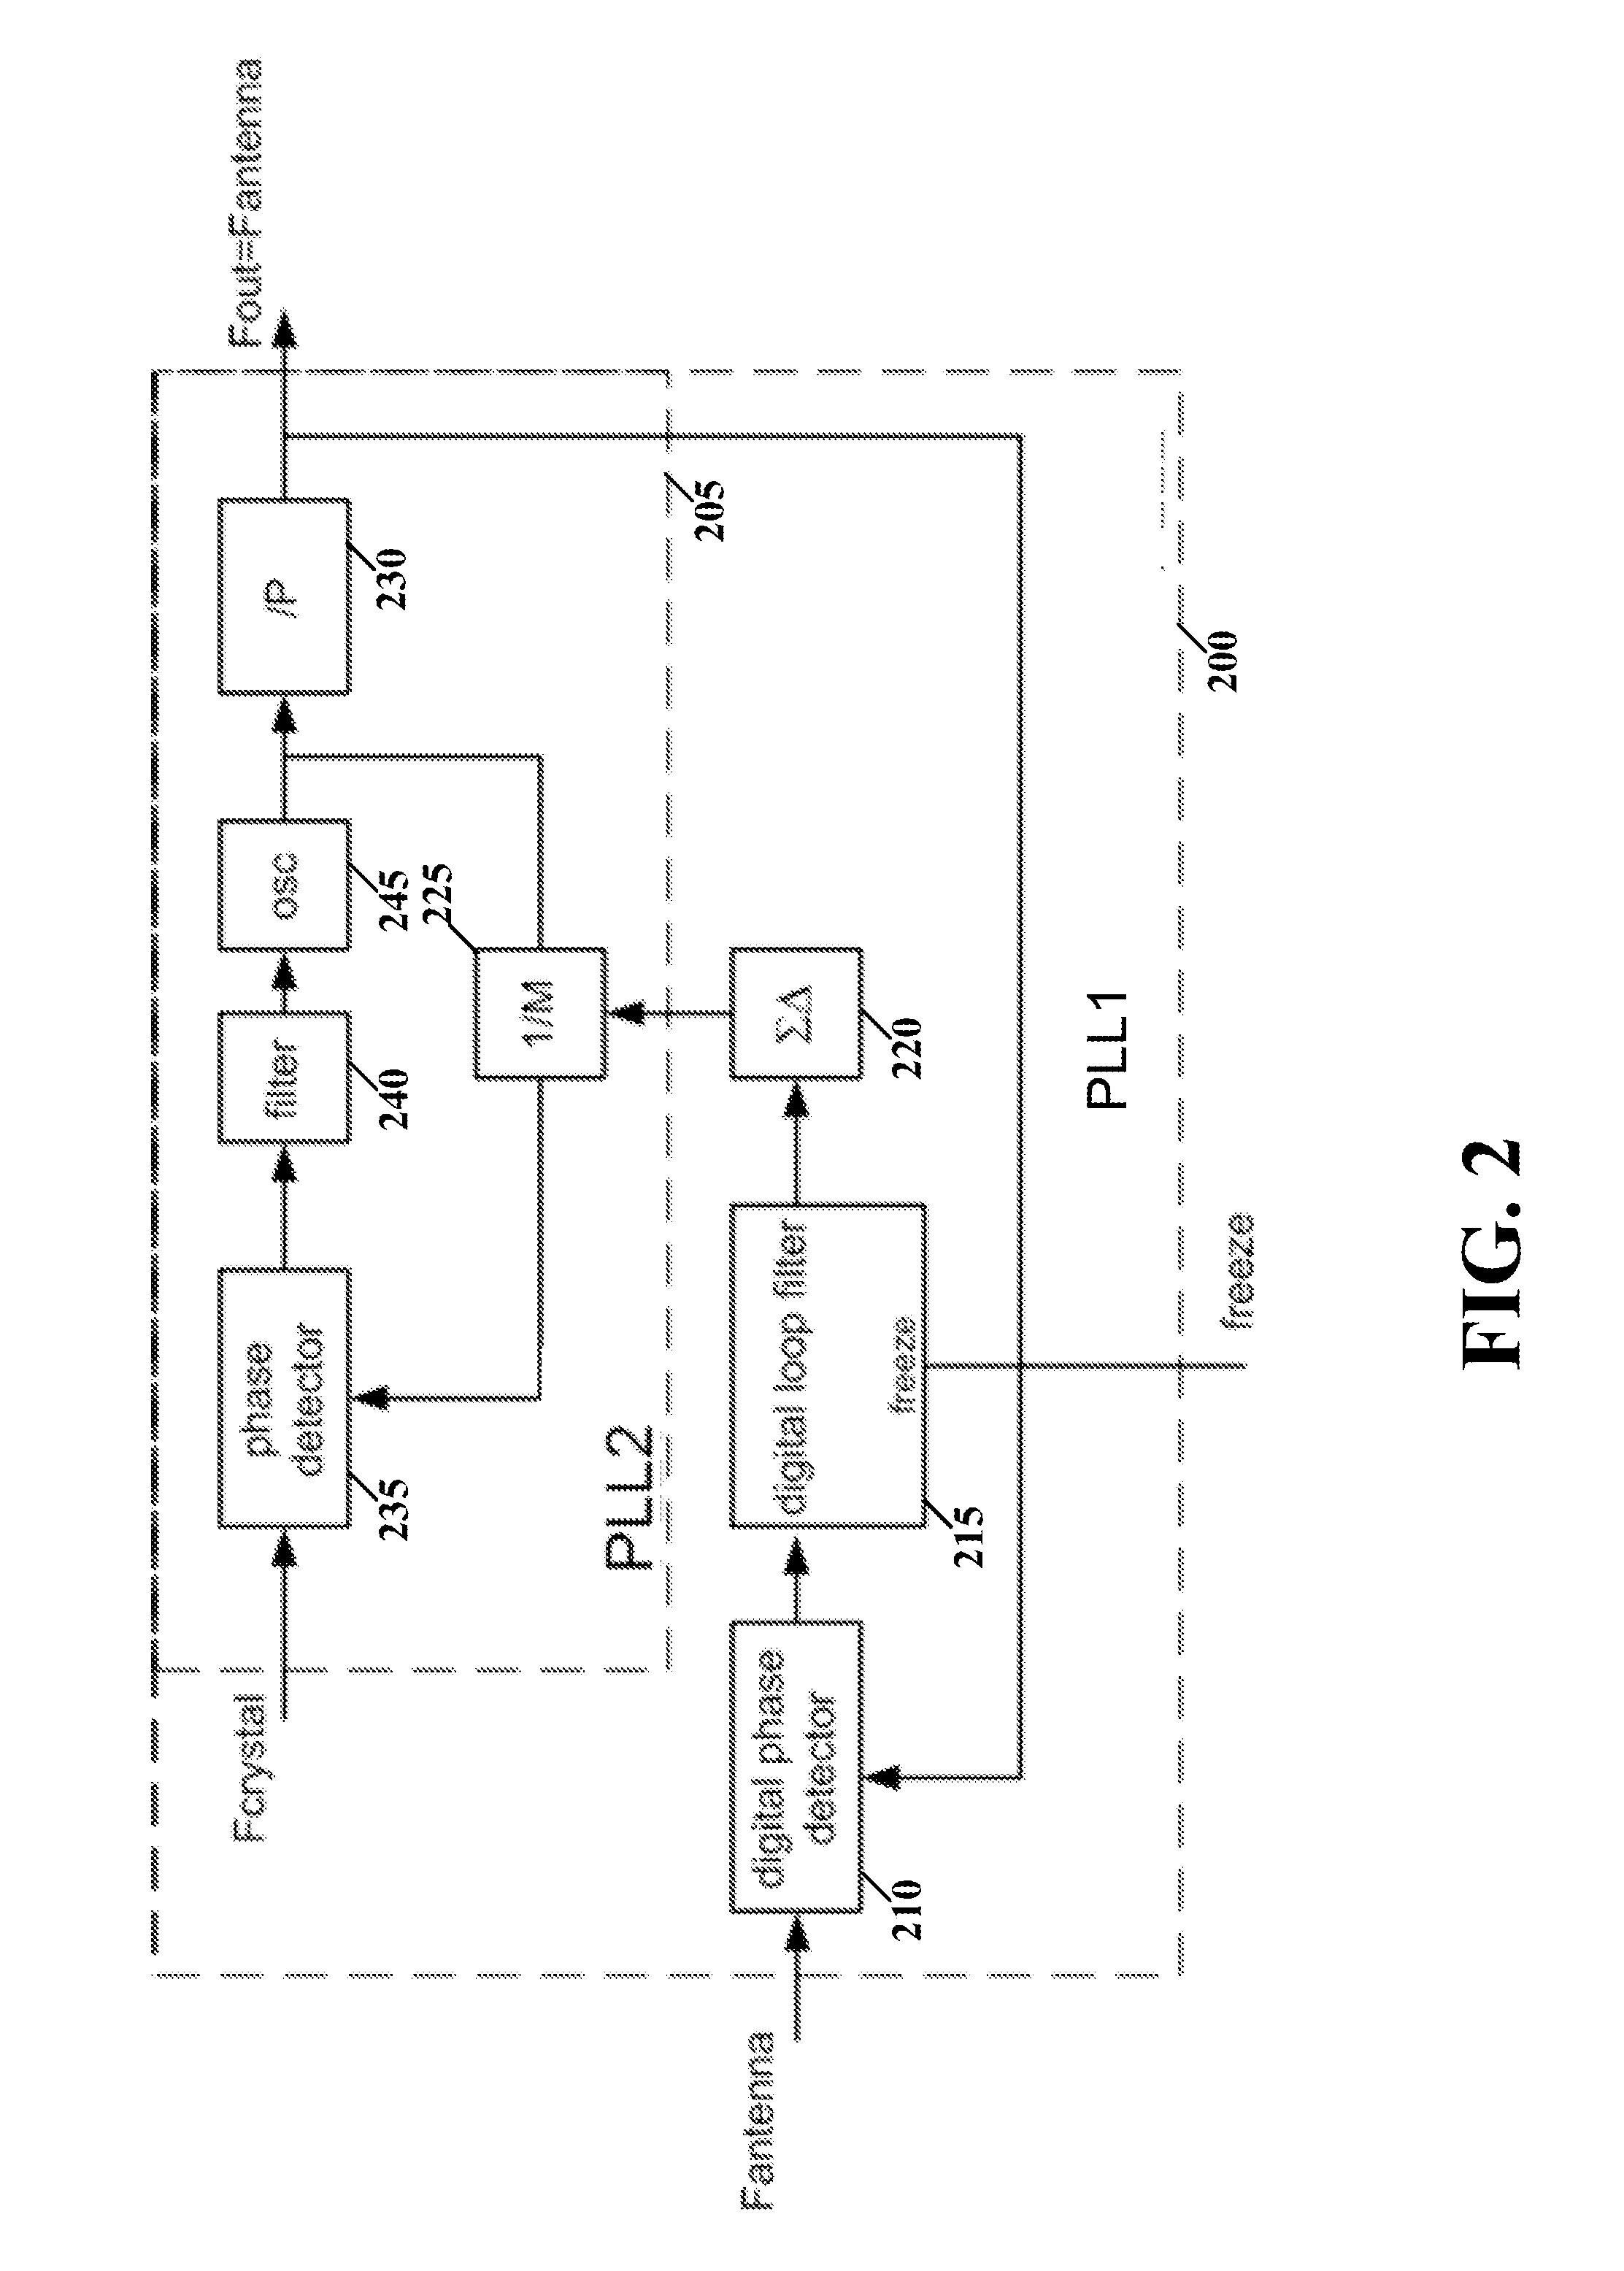 Clock synchronizer for aligning remote devices